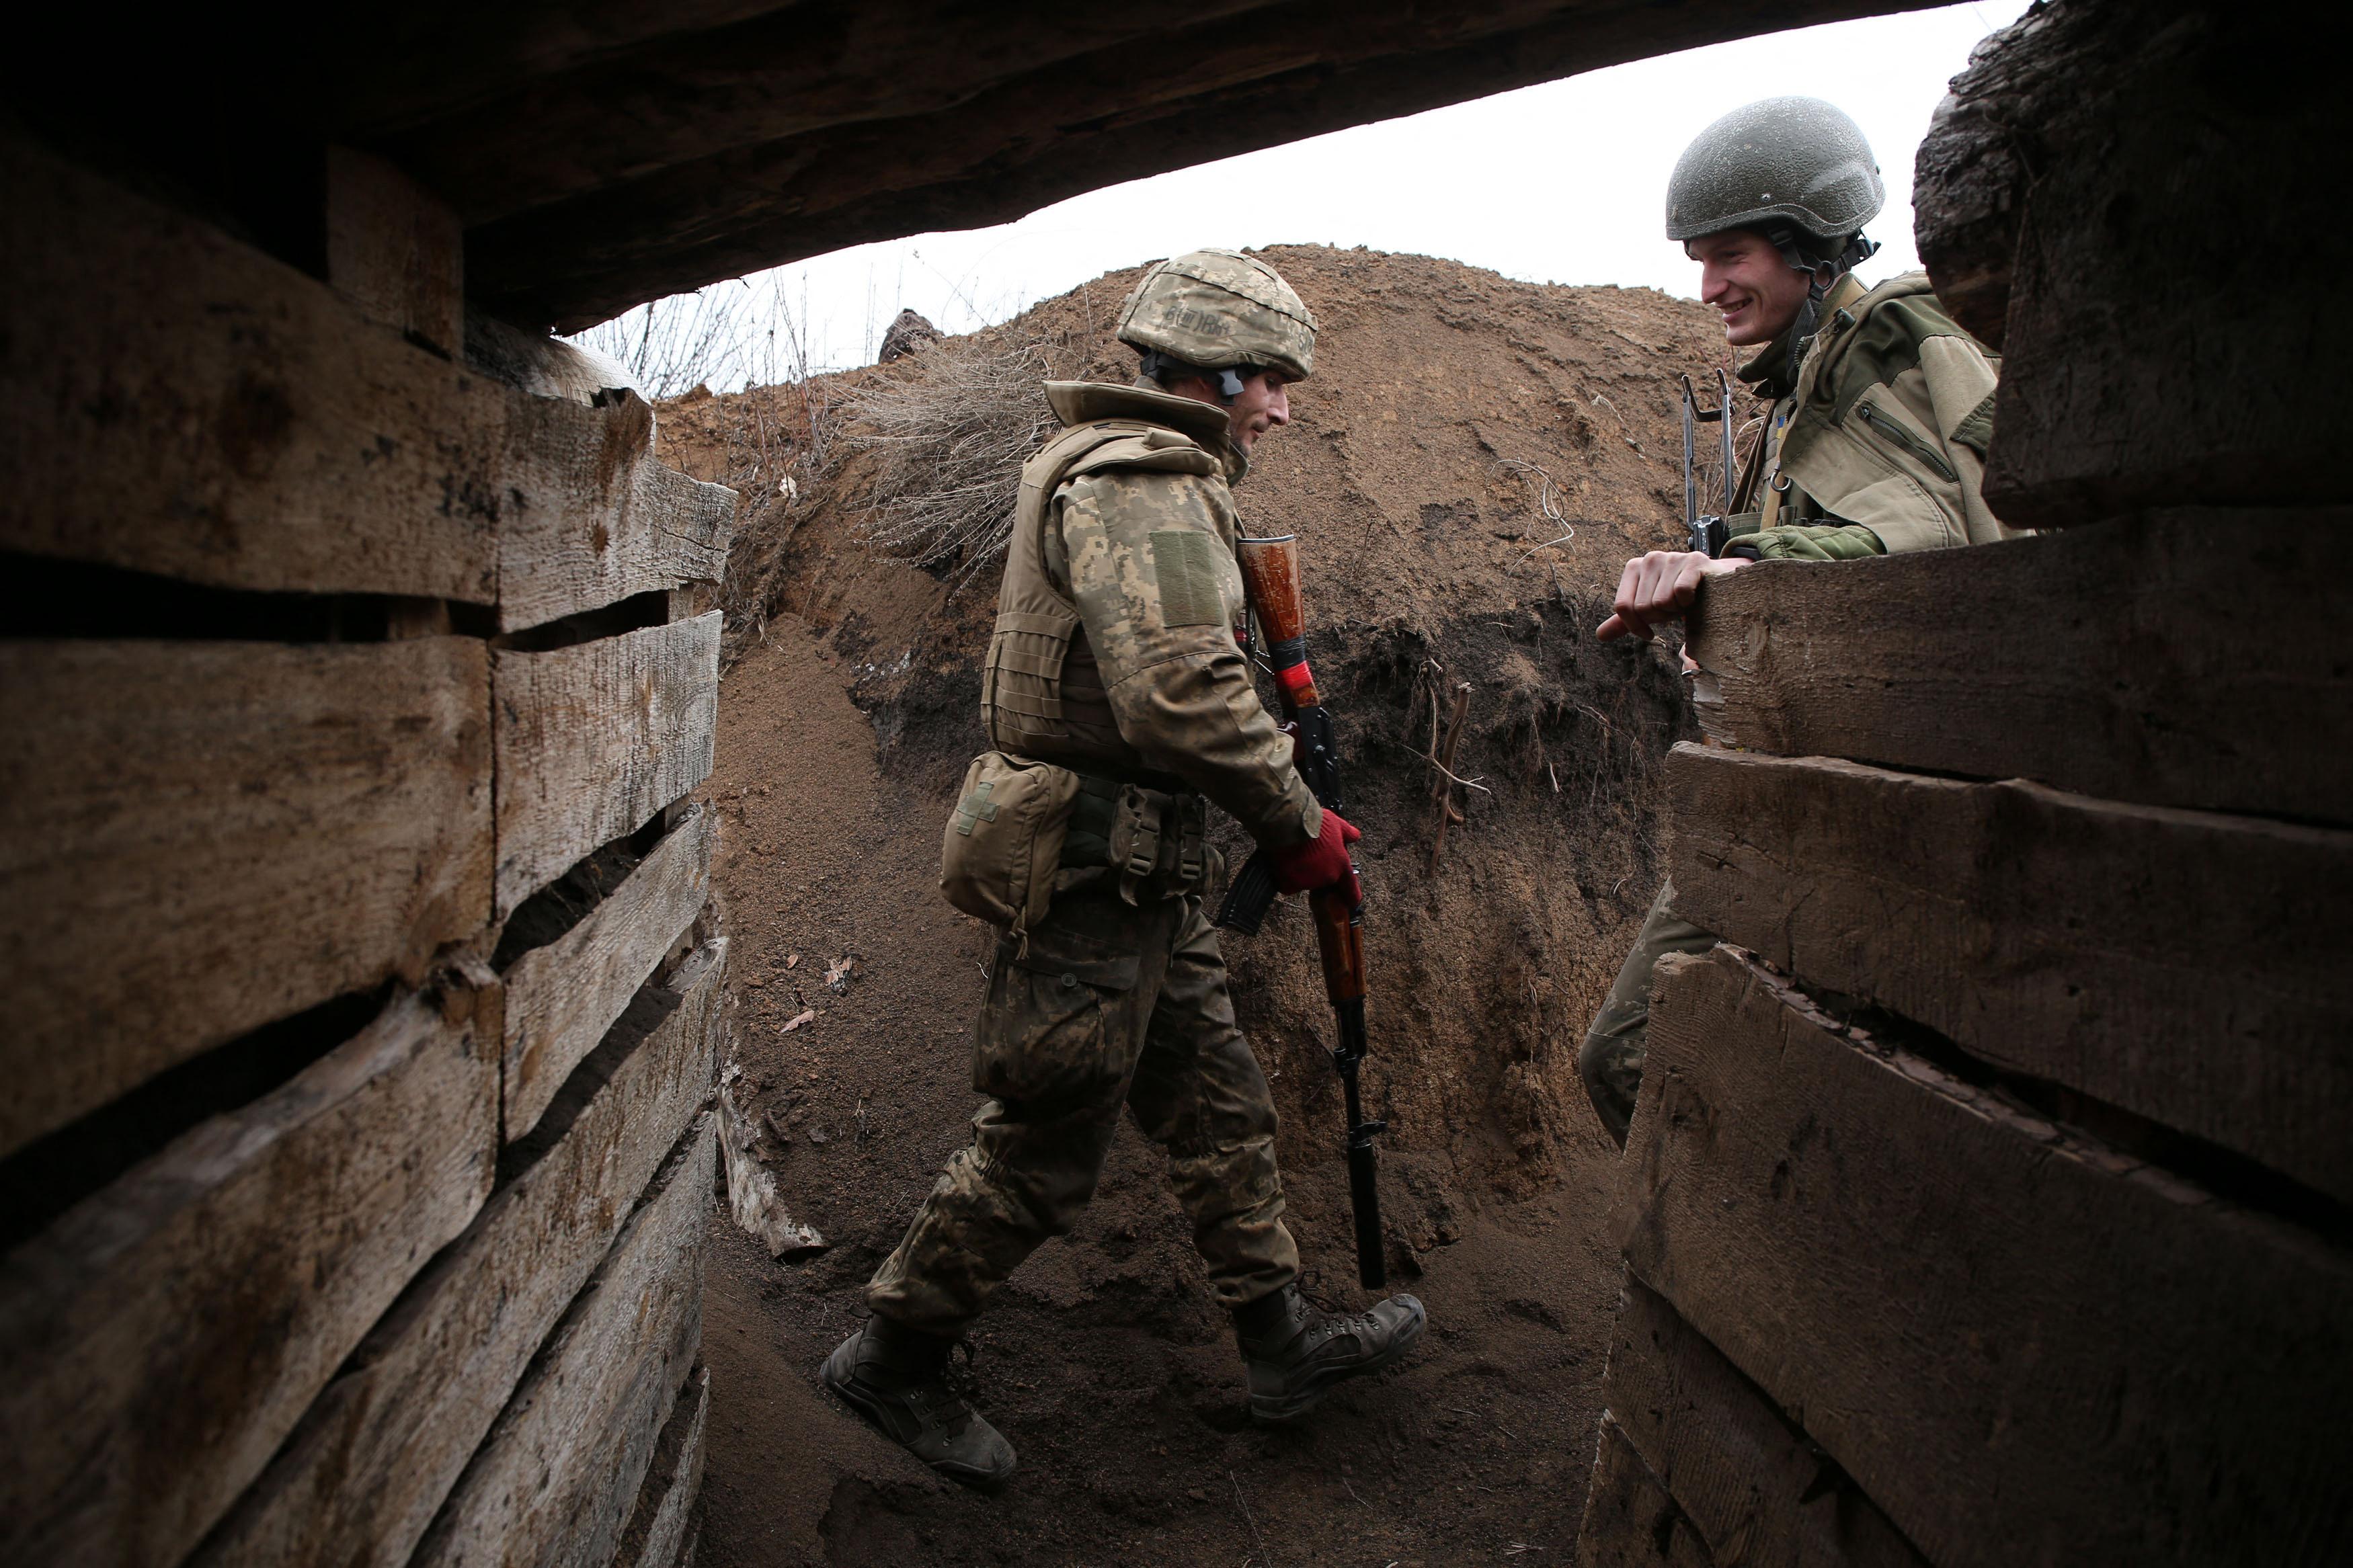 Ukrainian soldiers in a trench on the front lines facing Russian-backed separatists near the town of Zolote april 2021